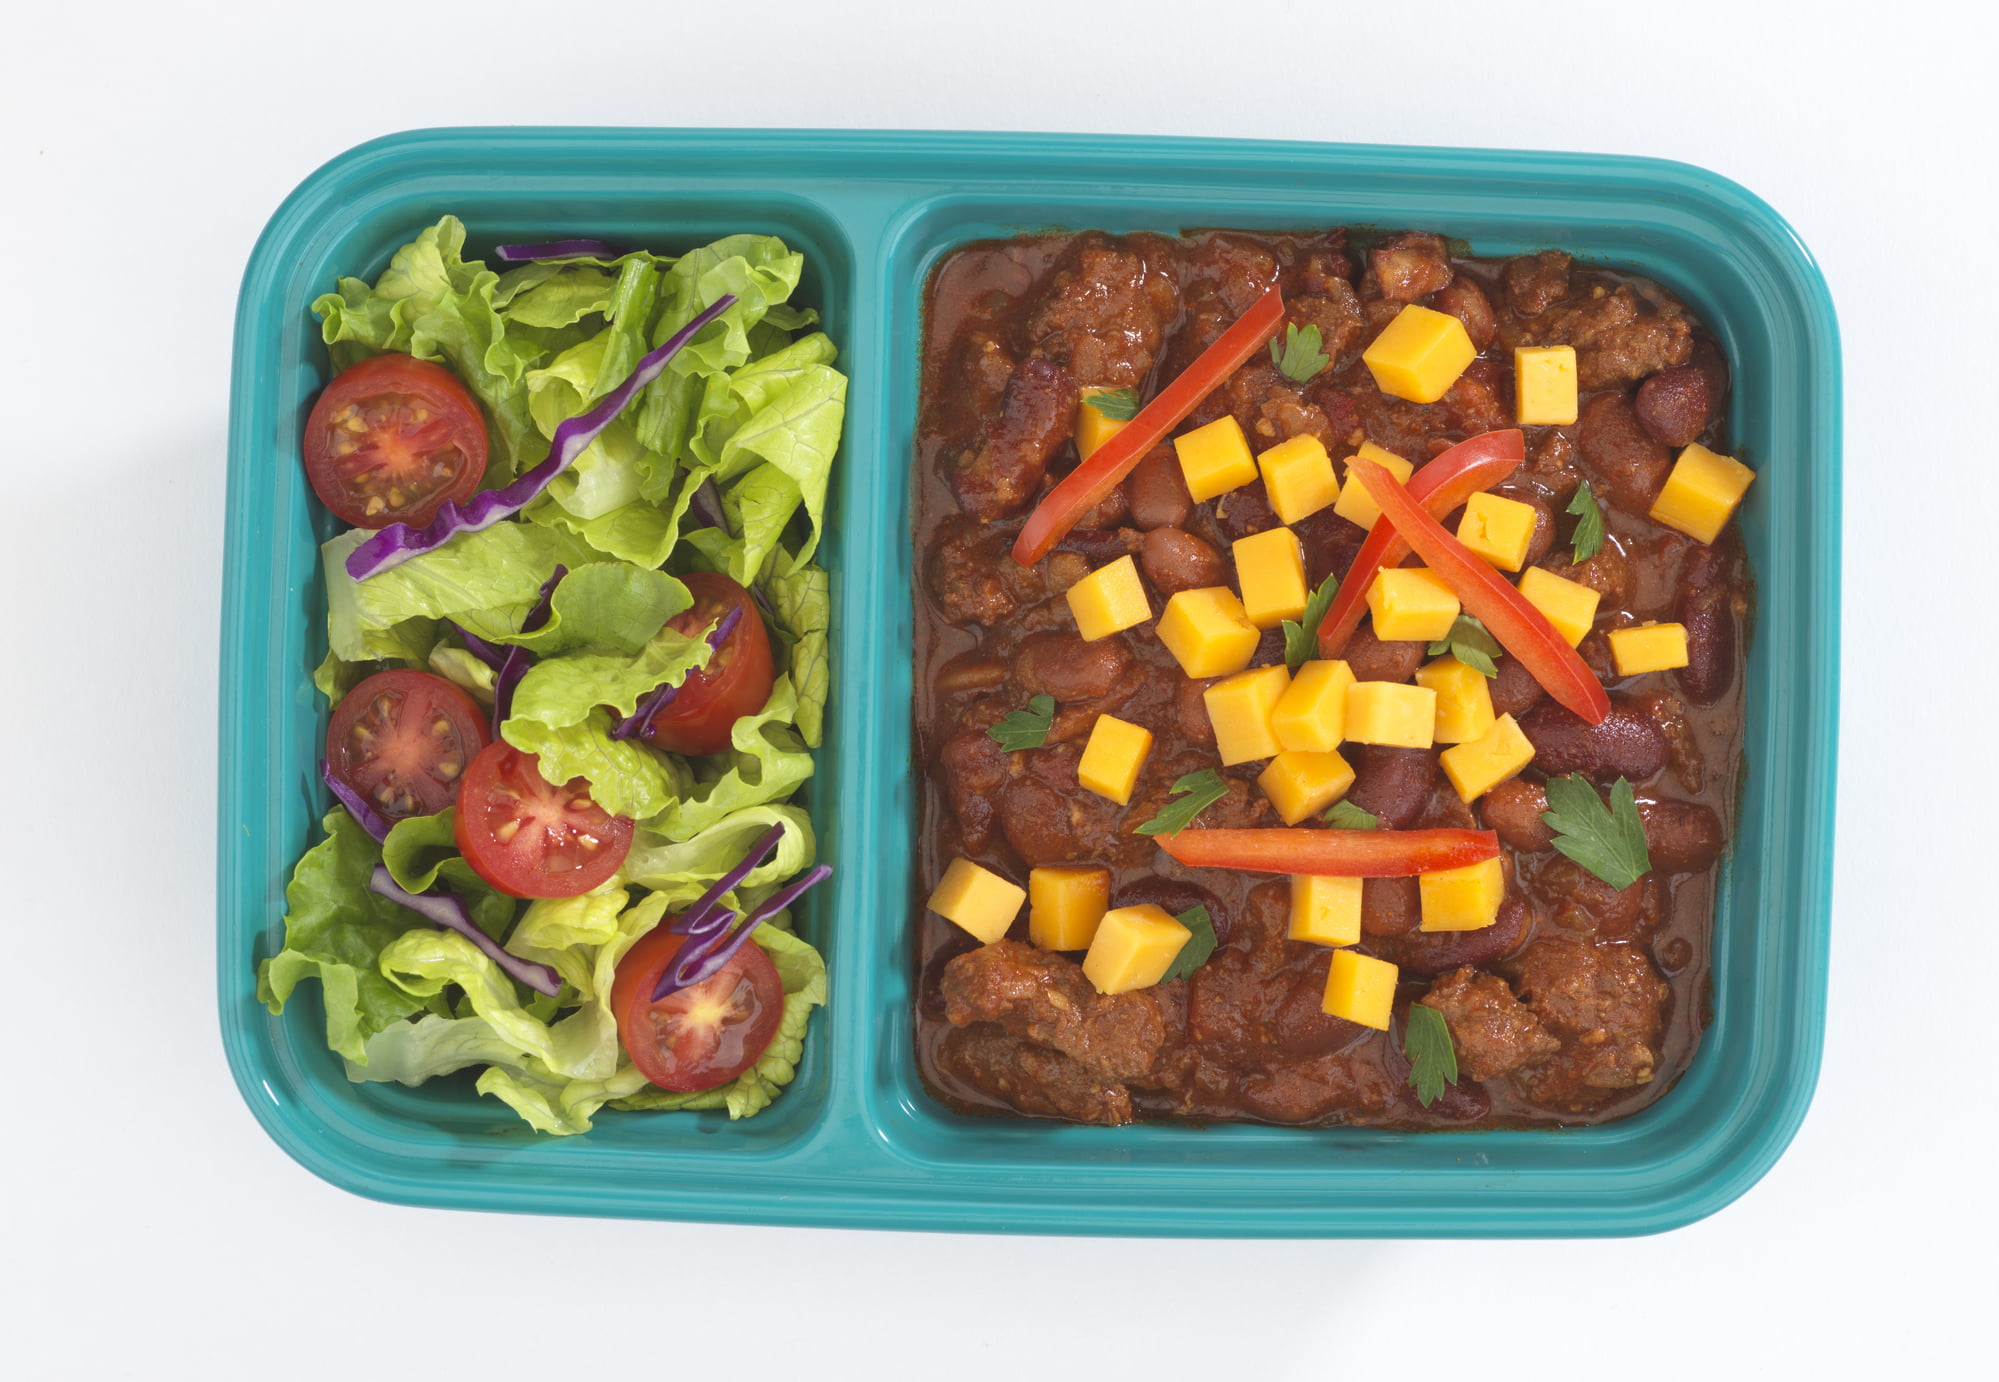 Good Cook Meal Prep, 2 Compartment BPA Free,  Microwavable/Dishwasher/Freezer Safe, 10 ct